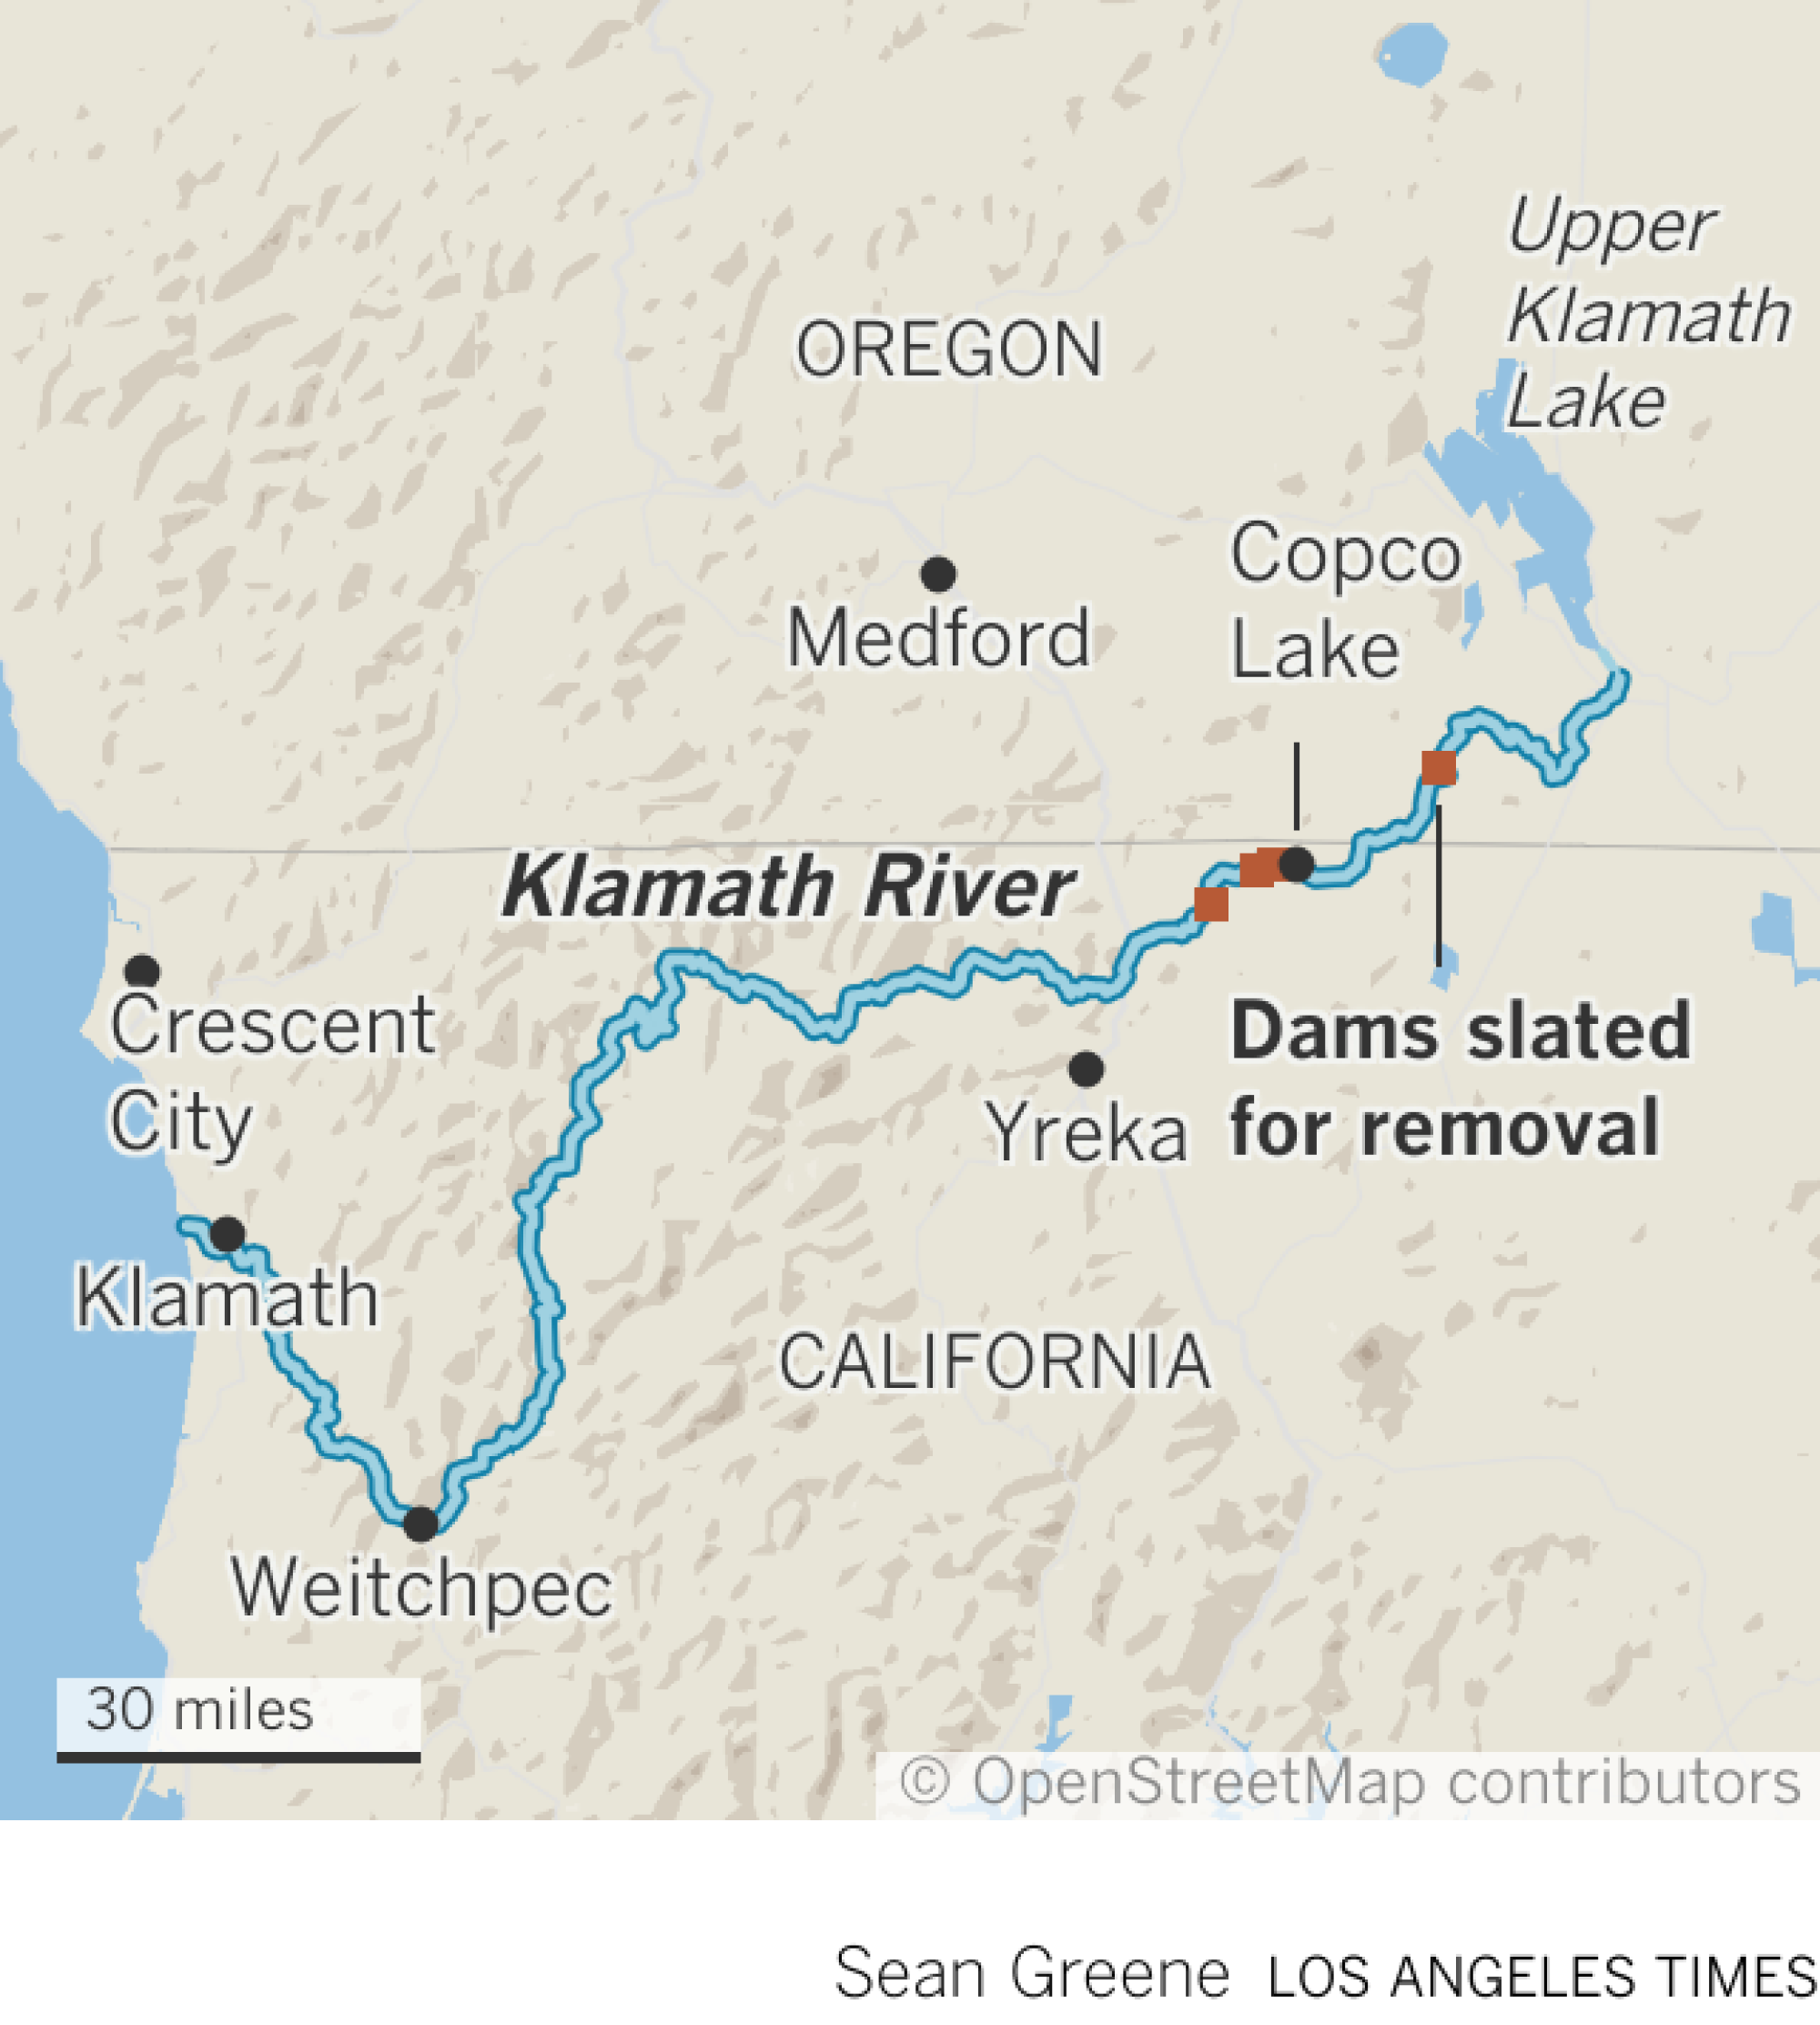 Map shows the locations of four dams slated for removal on the Klamath River near the California-Oregon border.